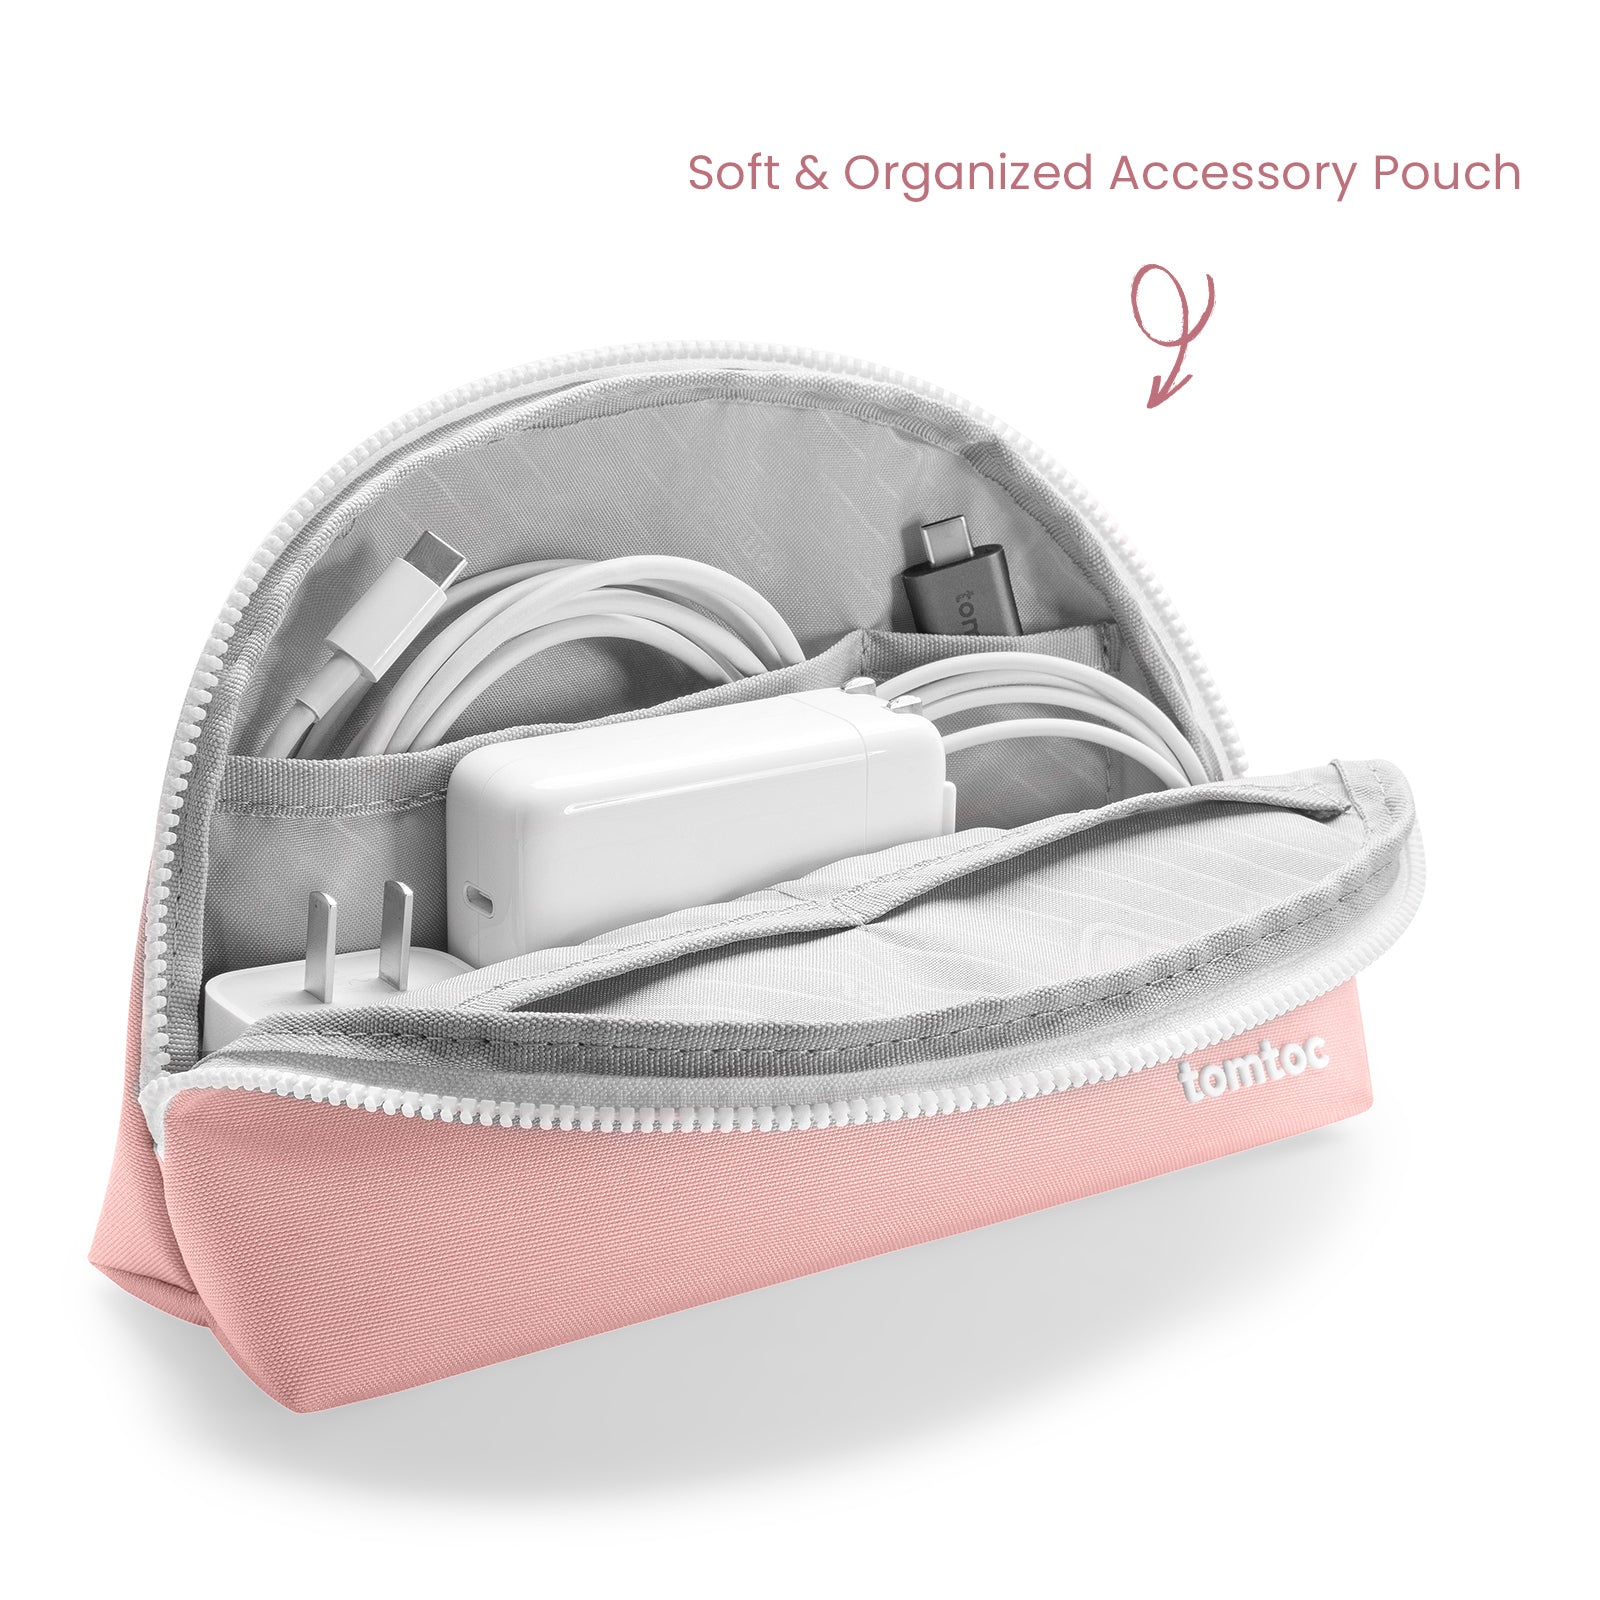 Versatile-A27 Shell Laptop Sleeve Kit for MacBook Air | Pink